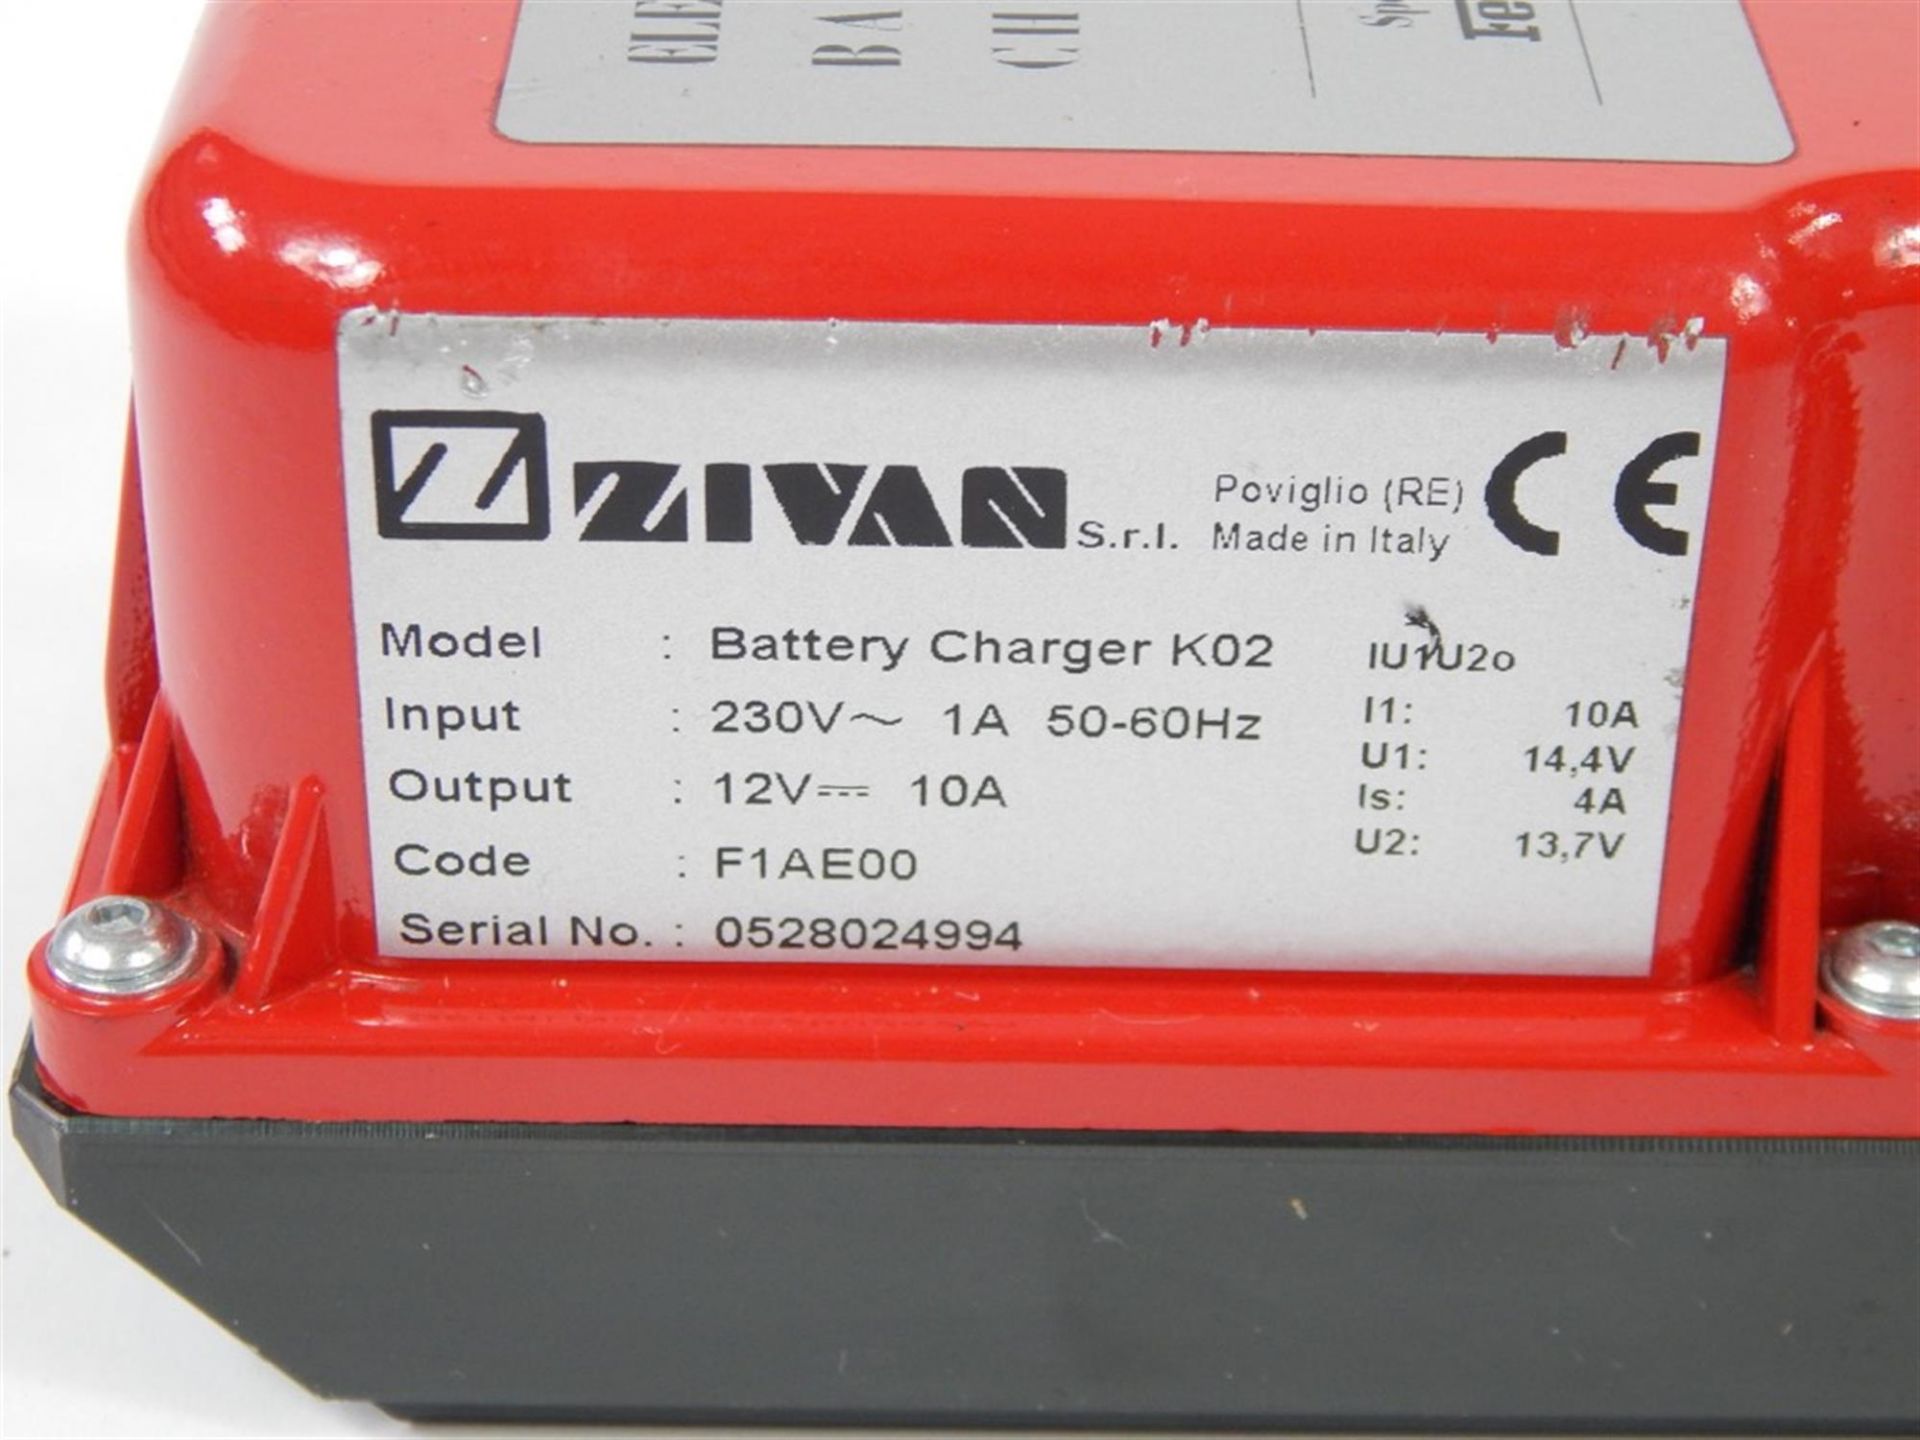 1990 - 2010 Ferrari Battery Conditioner/Charger Kit - Image 5 of 6